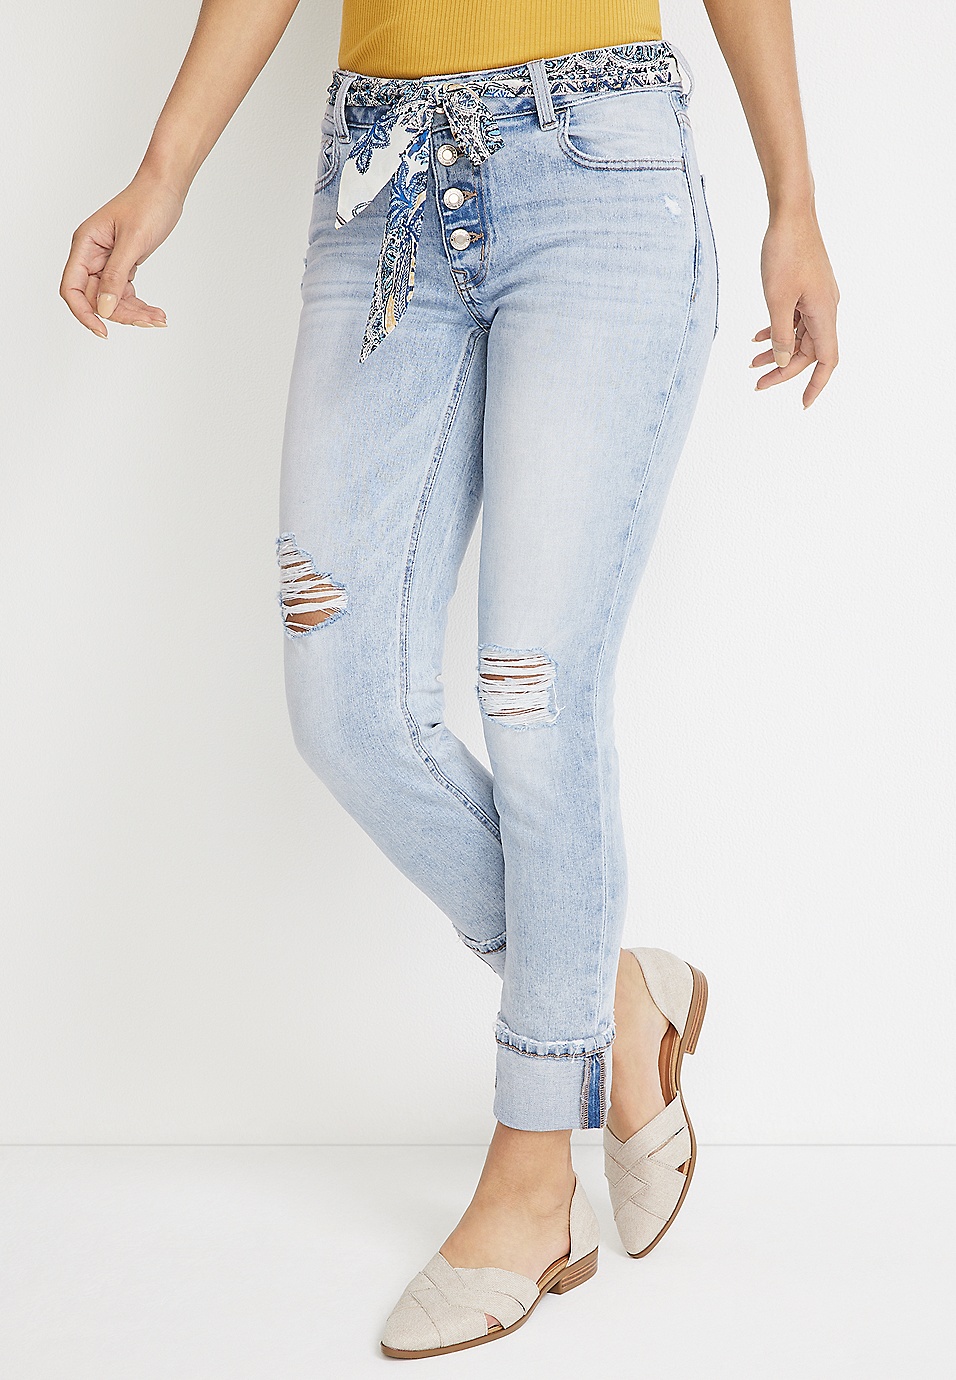 m jeans by maurices™ Slim Straight Ankle Mid Rise Jean | maurices